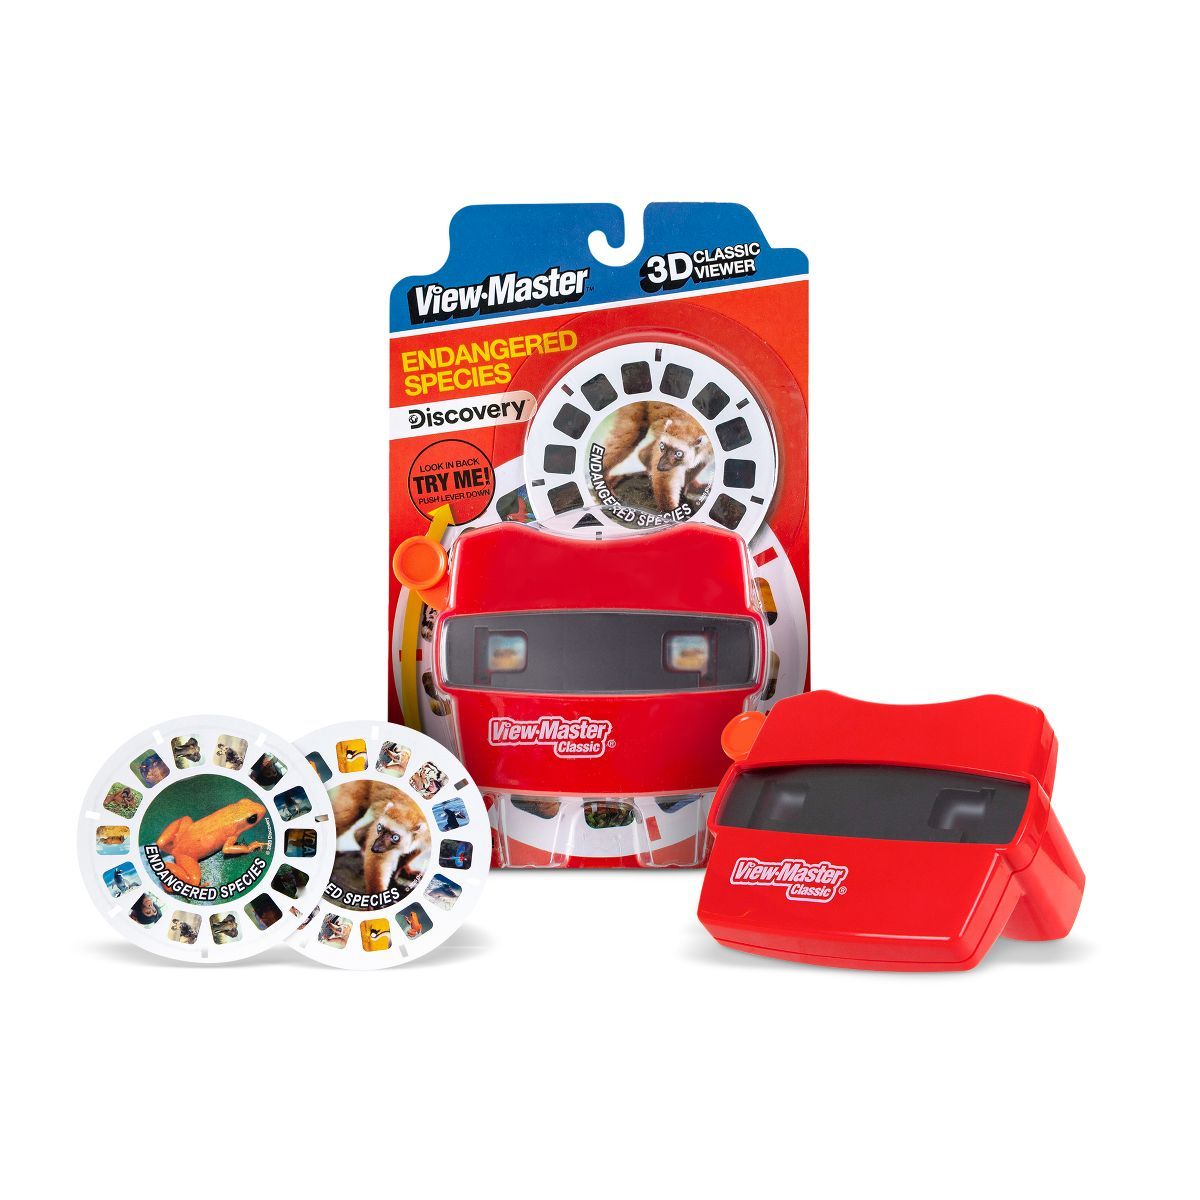 View-Master Classic | Target